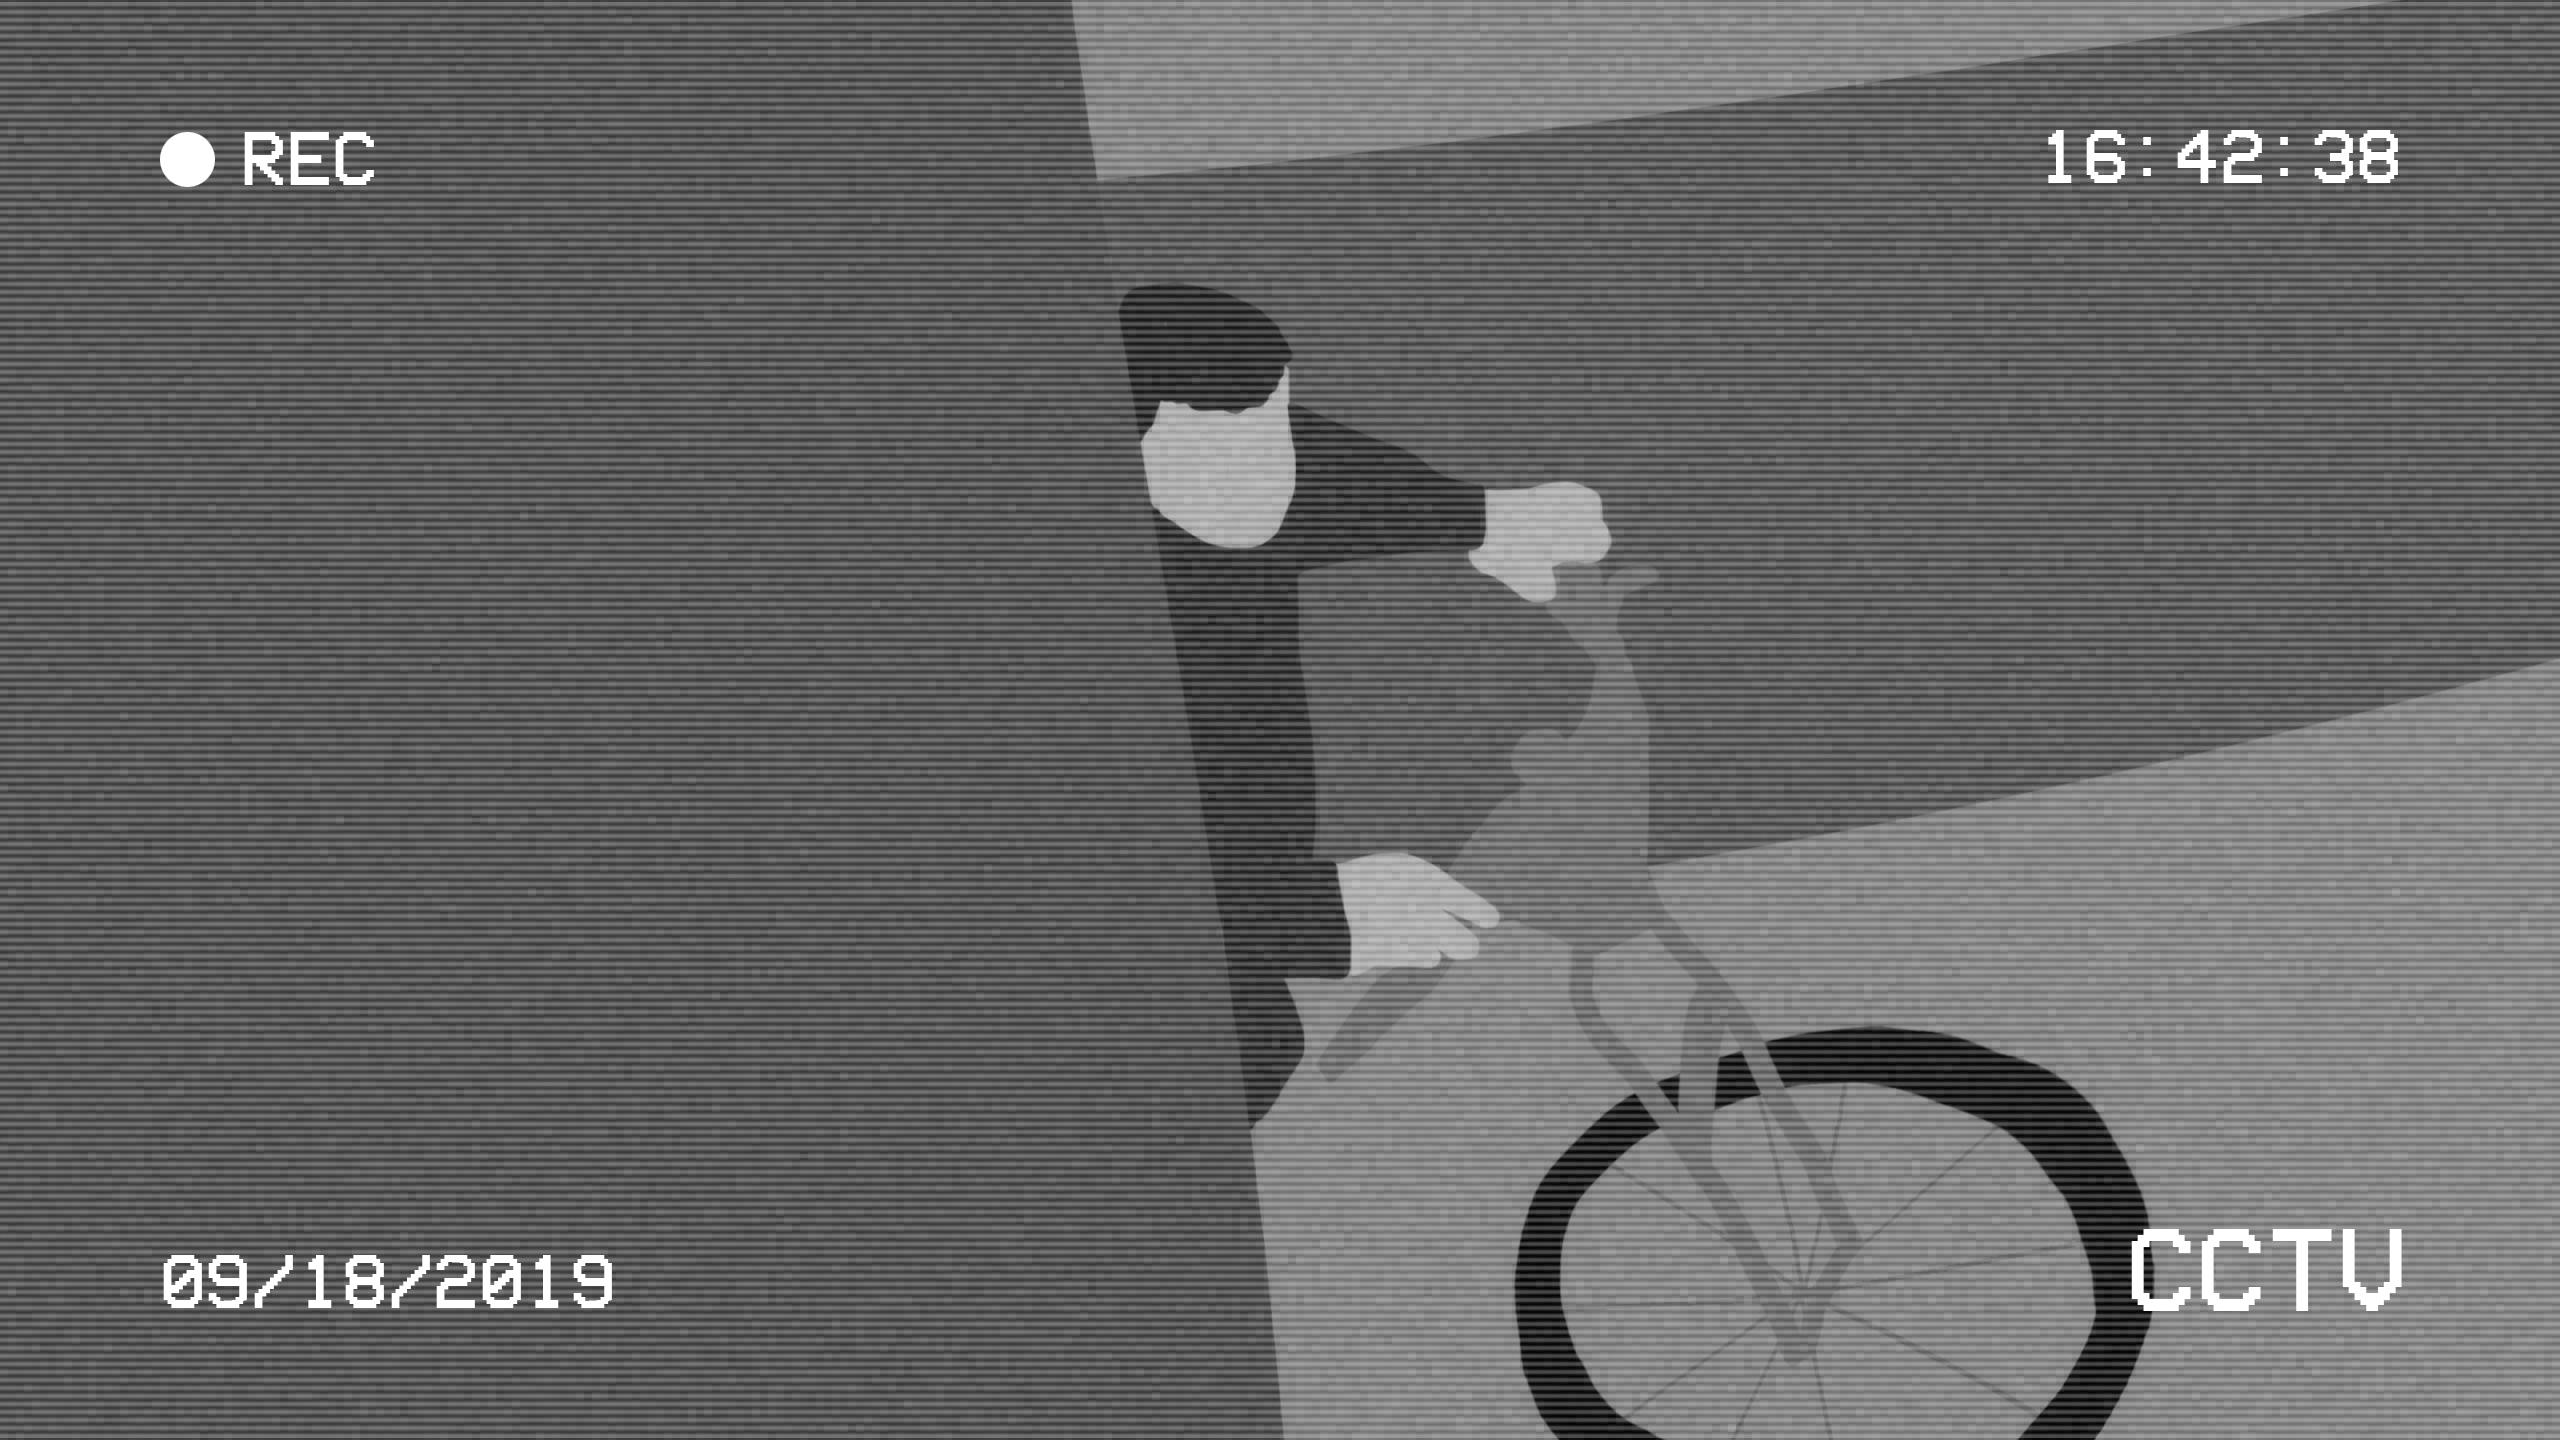 A black and white illustration of a man stealing a bicycle edited to look like a shot from CCTV footage